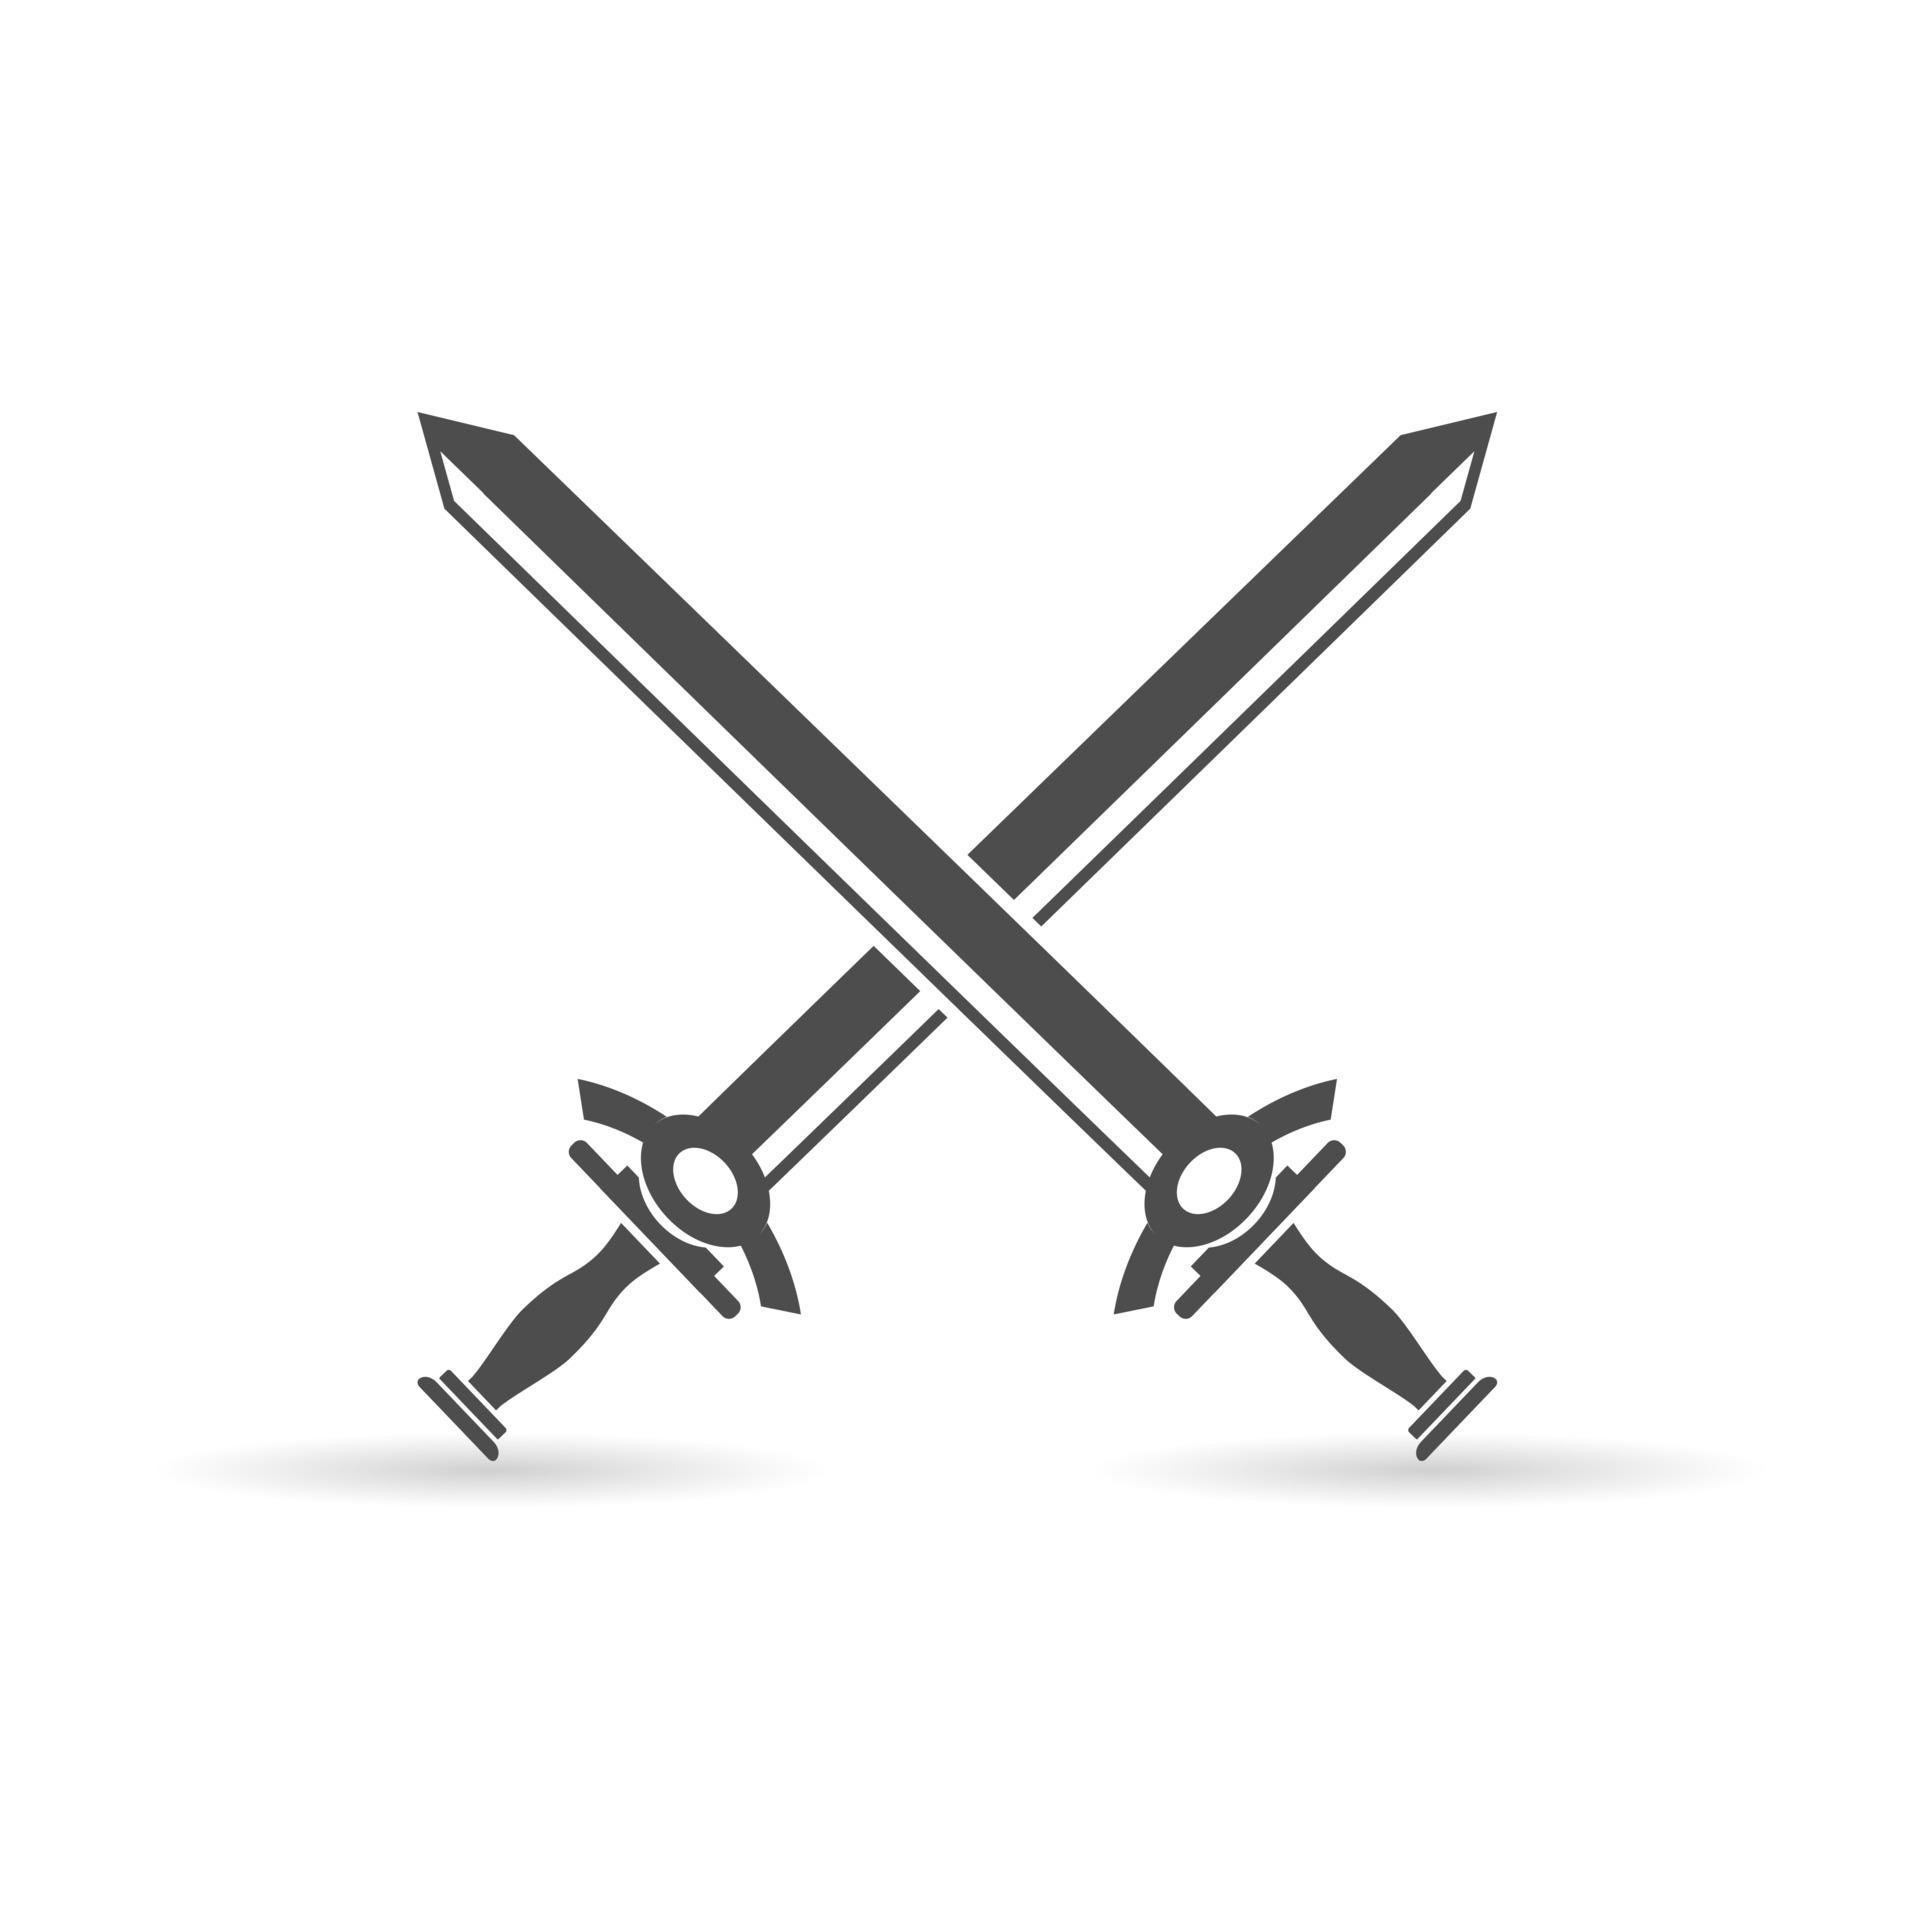 Monochrome vintage icon crossed swords. Simple shape for design logo,  emblem, symbol, sign, badge, label, stamp. Hand drawn vector illustration.  Military weapons, isolated on white background. Stock Vector